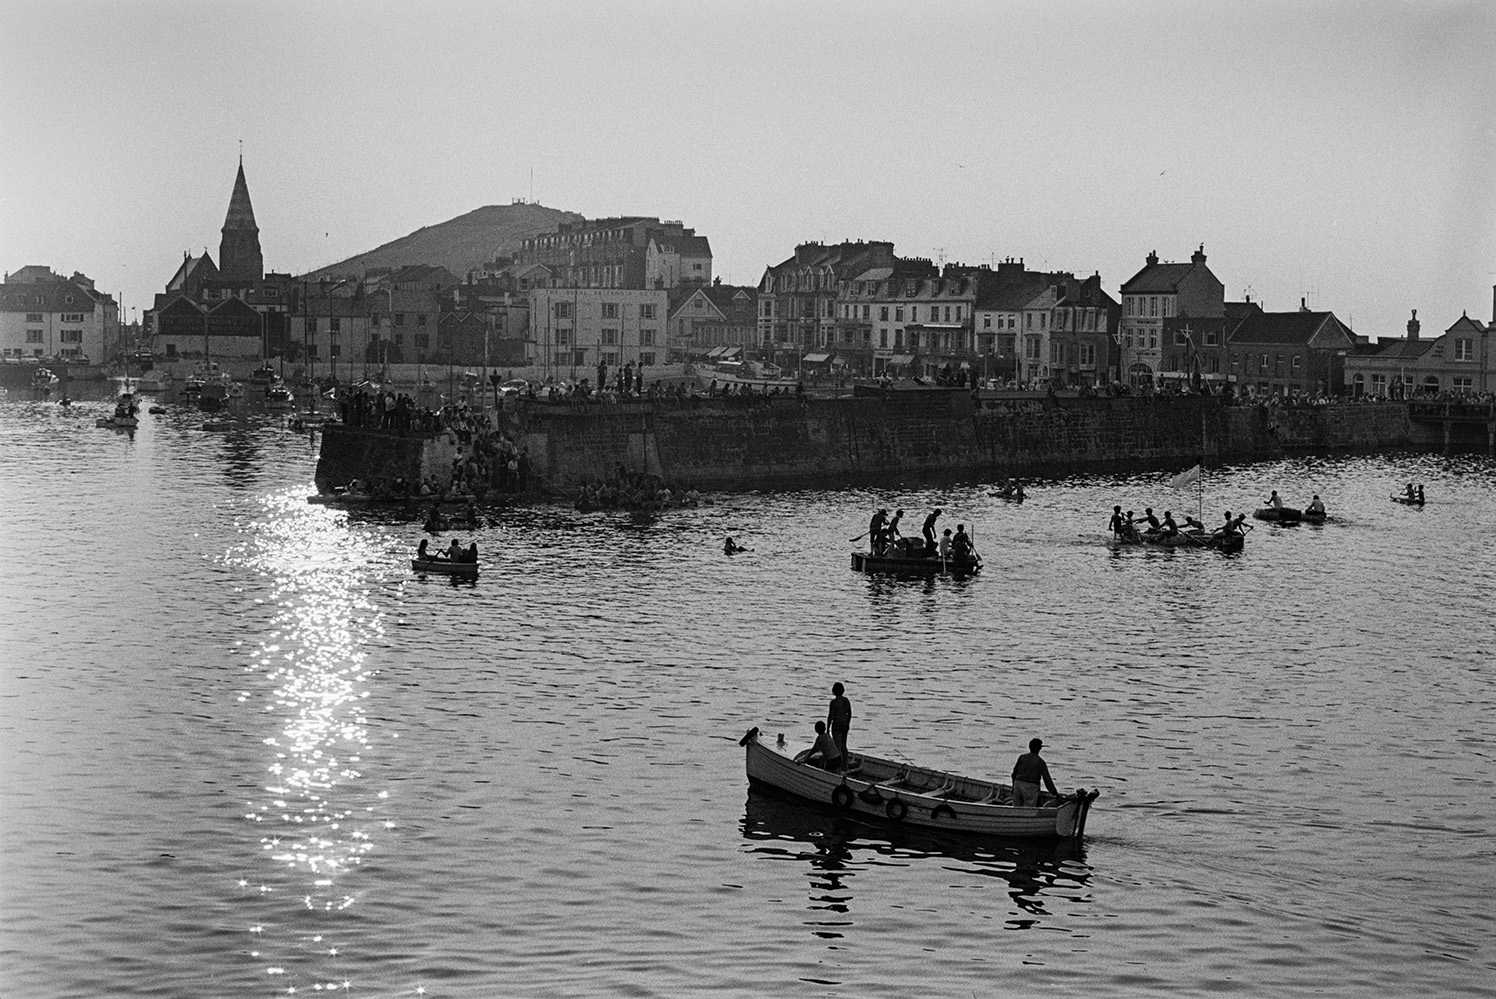 Spectators watching the raft race from the harbour wall at Ilfracombe. The town can be seen in the background.